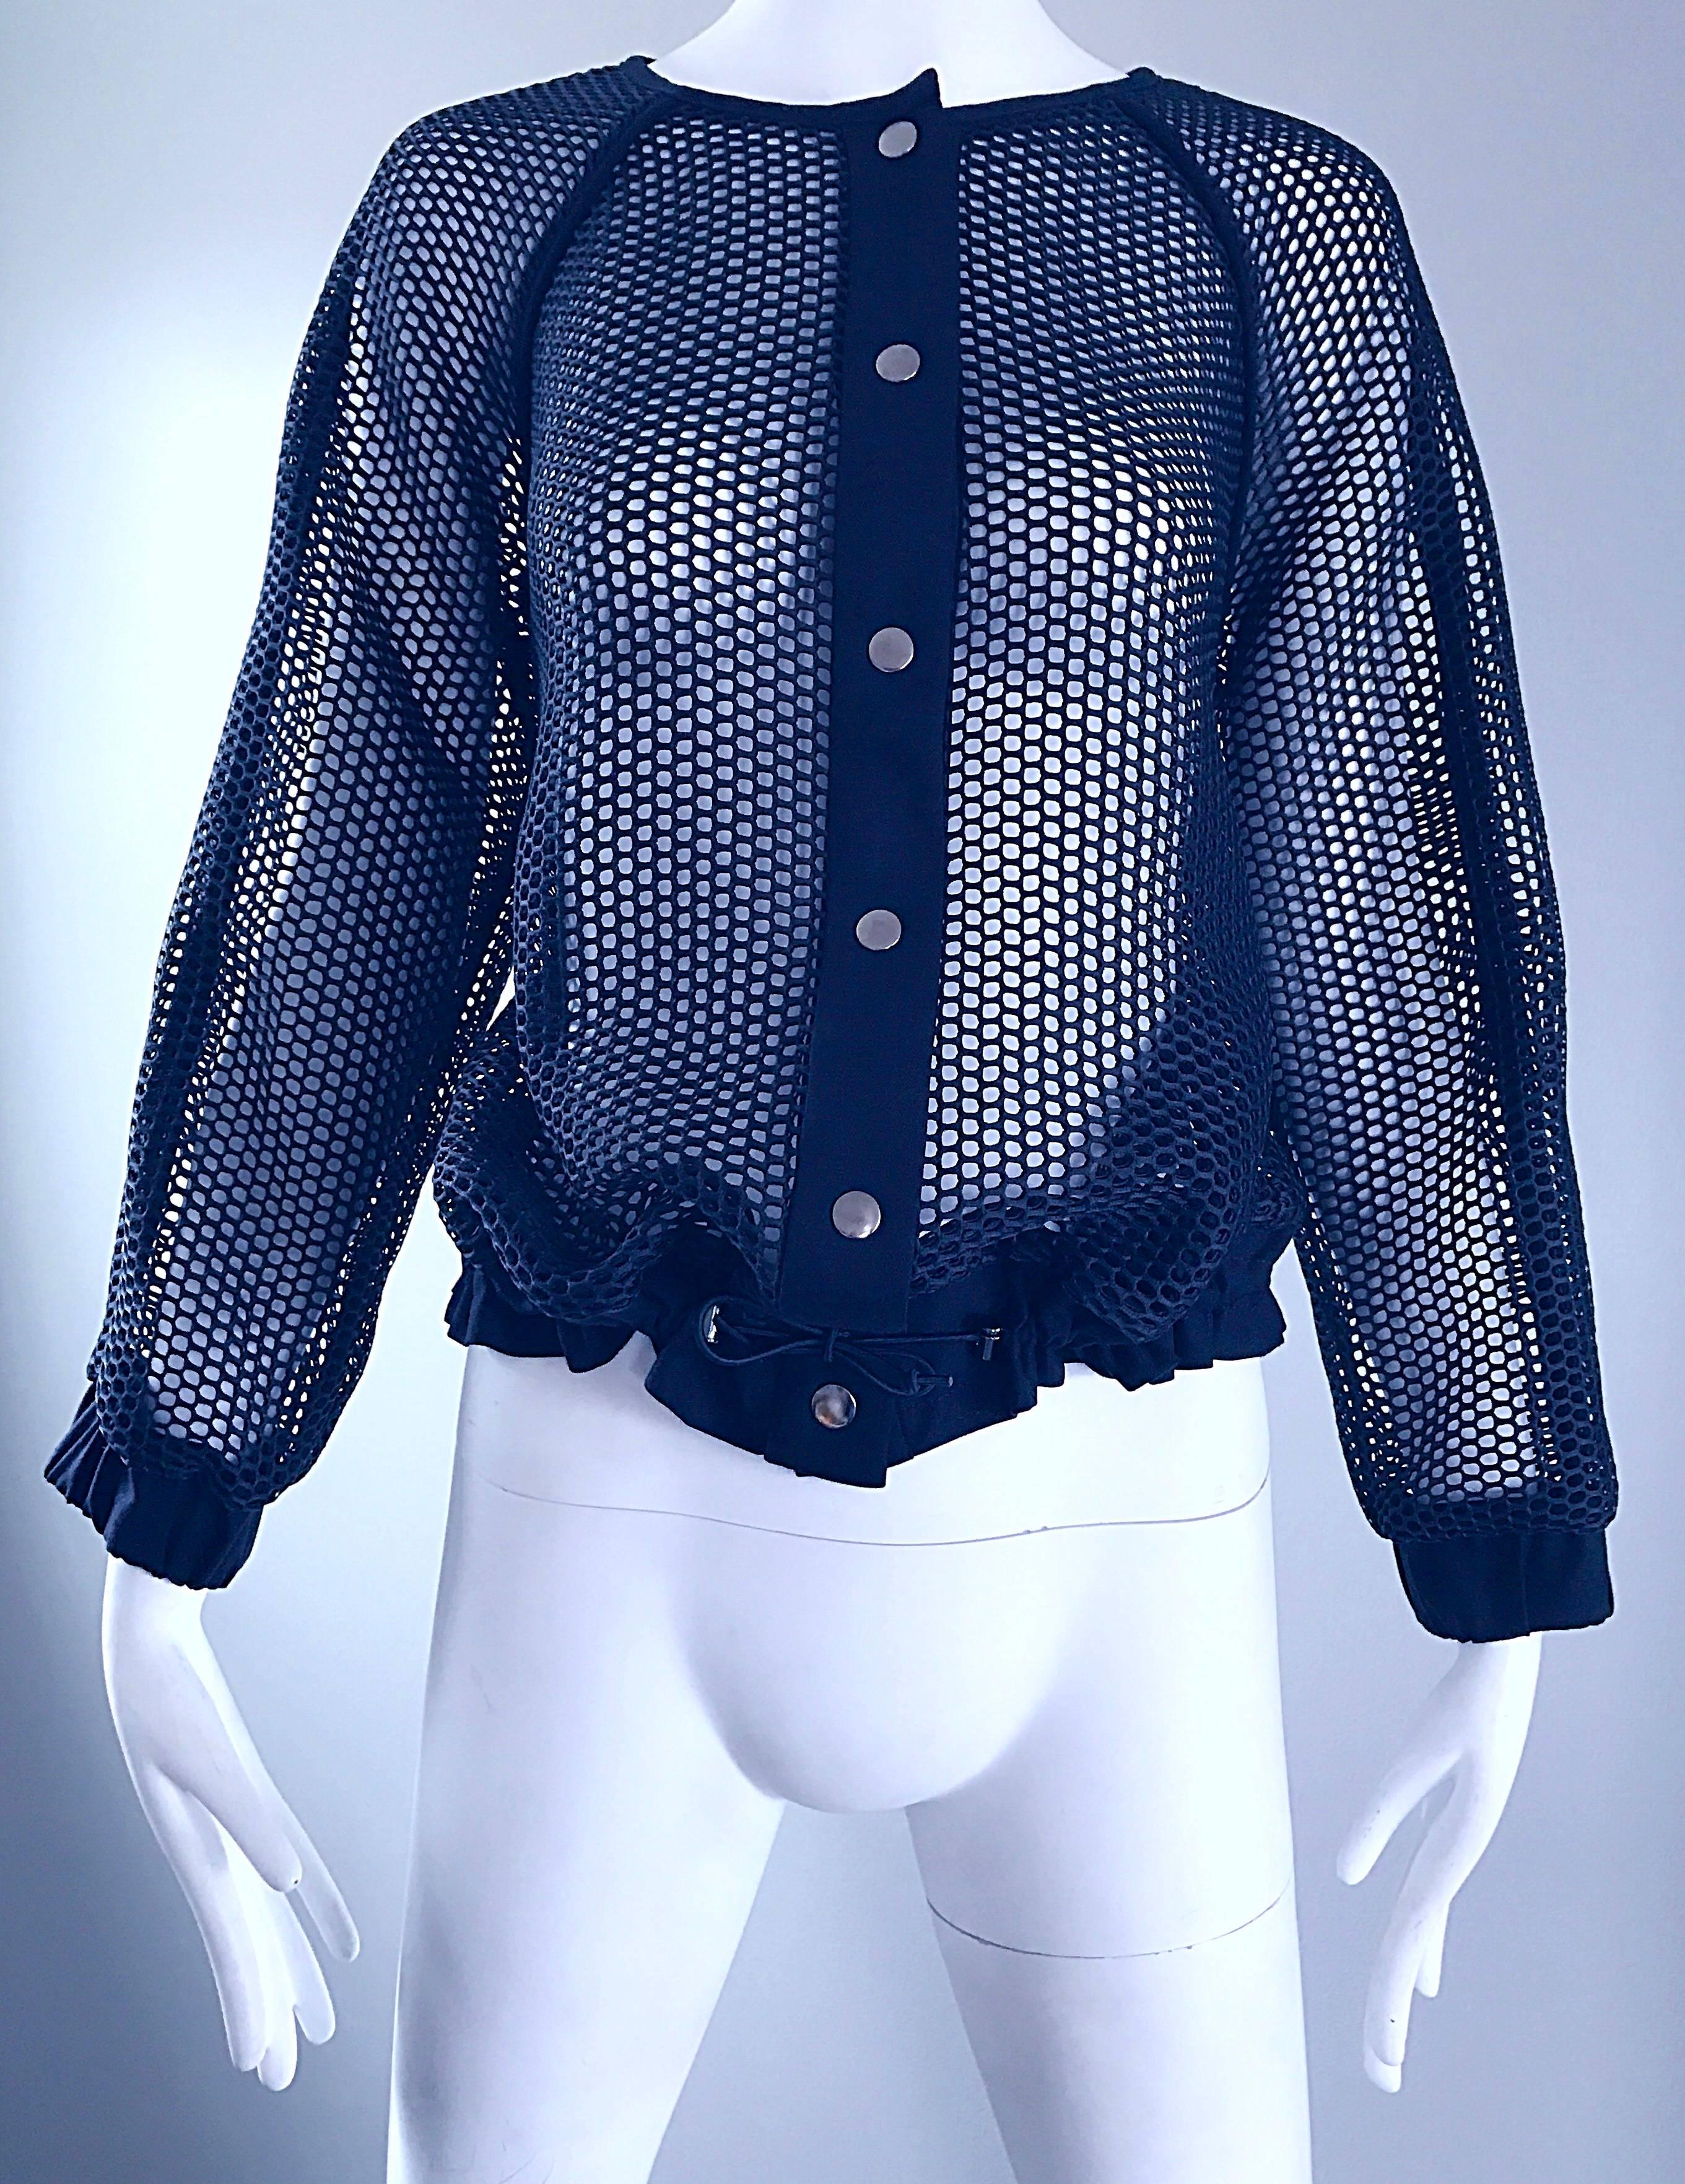 NWT Laver Navy Blue $795 Perforated Cut - Out Net Nautical Jacket Top Cover Up 5